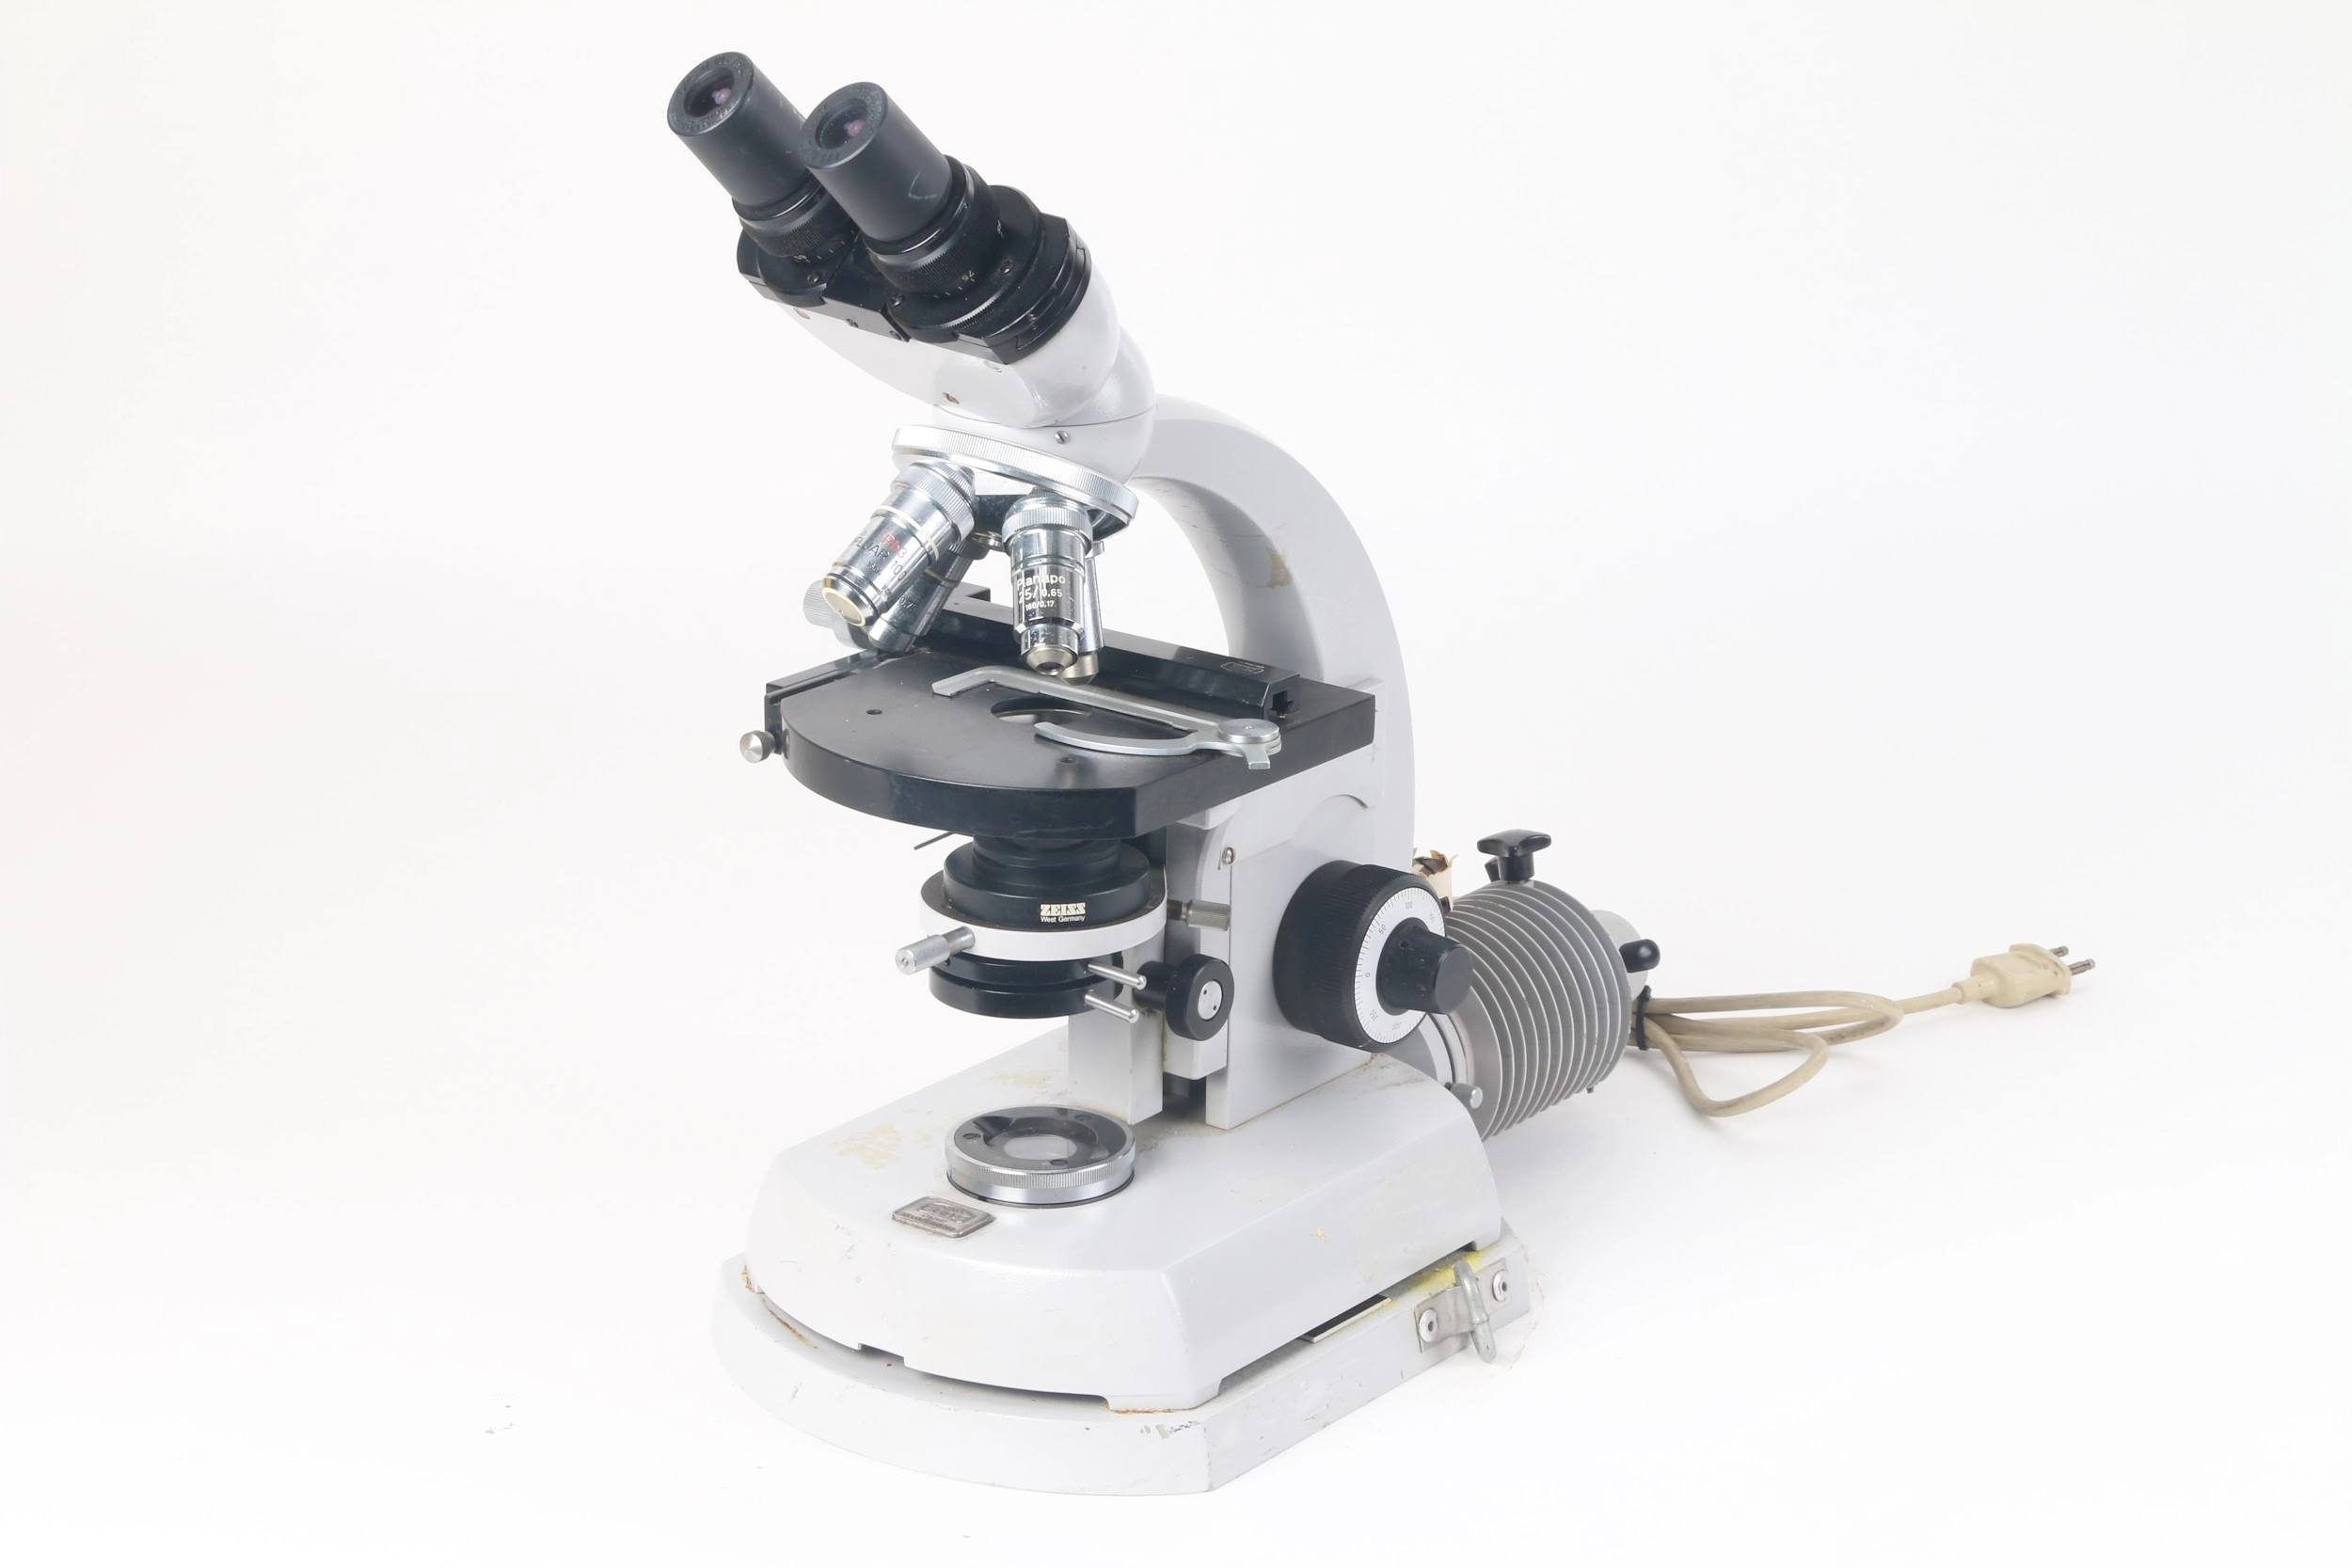 Carl Zeiss 4762407 Microscope With Lens + 4x Objectives NEOFLUAR PH3 Planapo